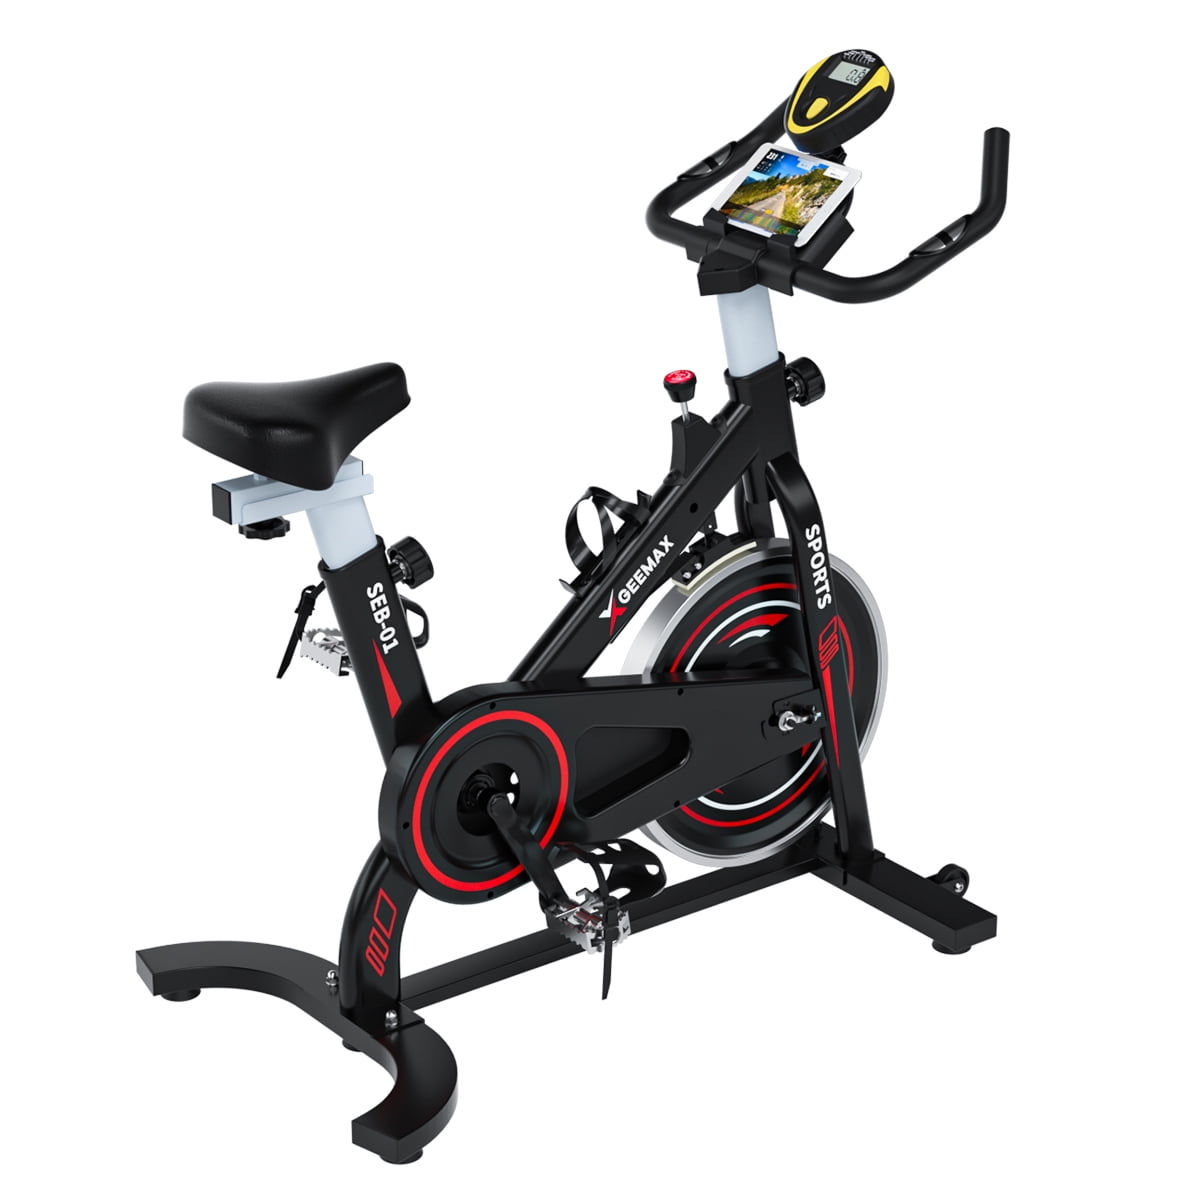 NEW Indoor Exercise Bike Stationary Cycling Bicycle Cardio Fit Fitness Workout